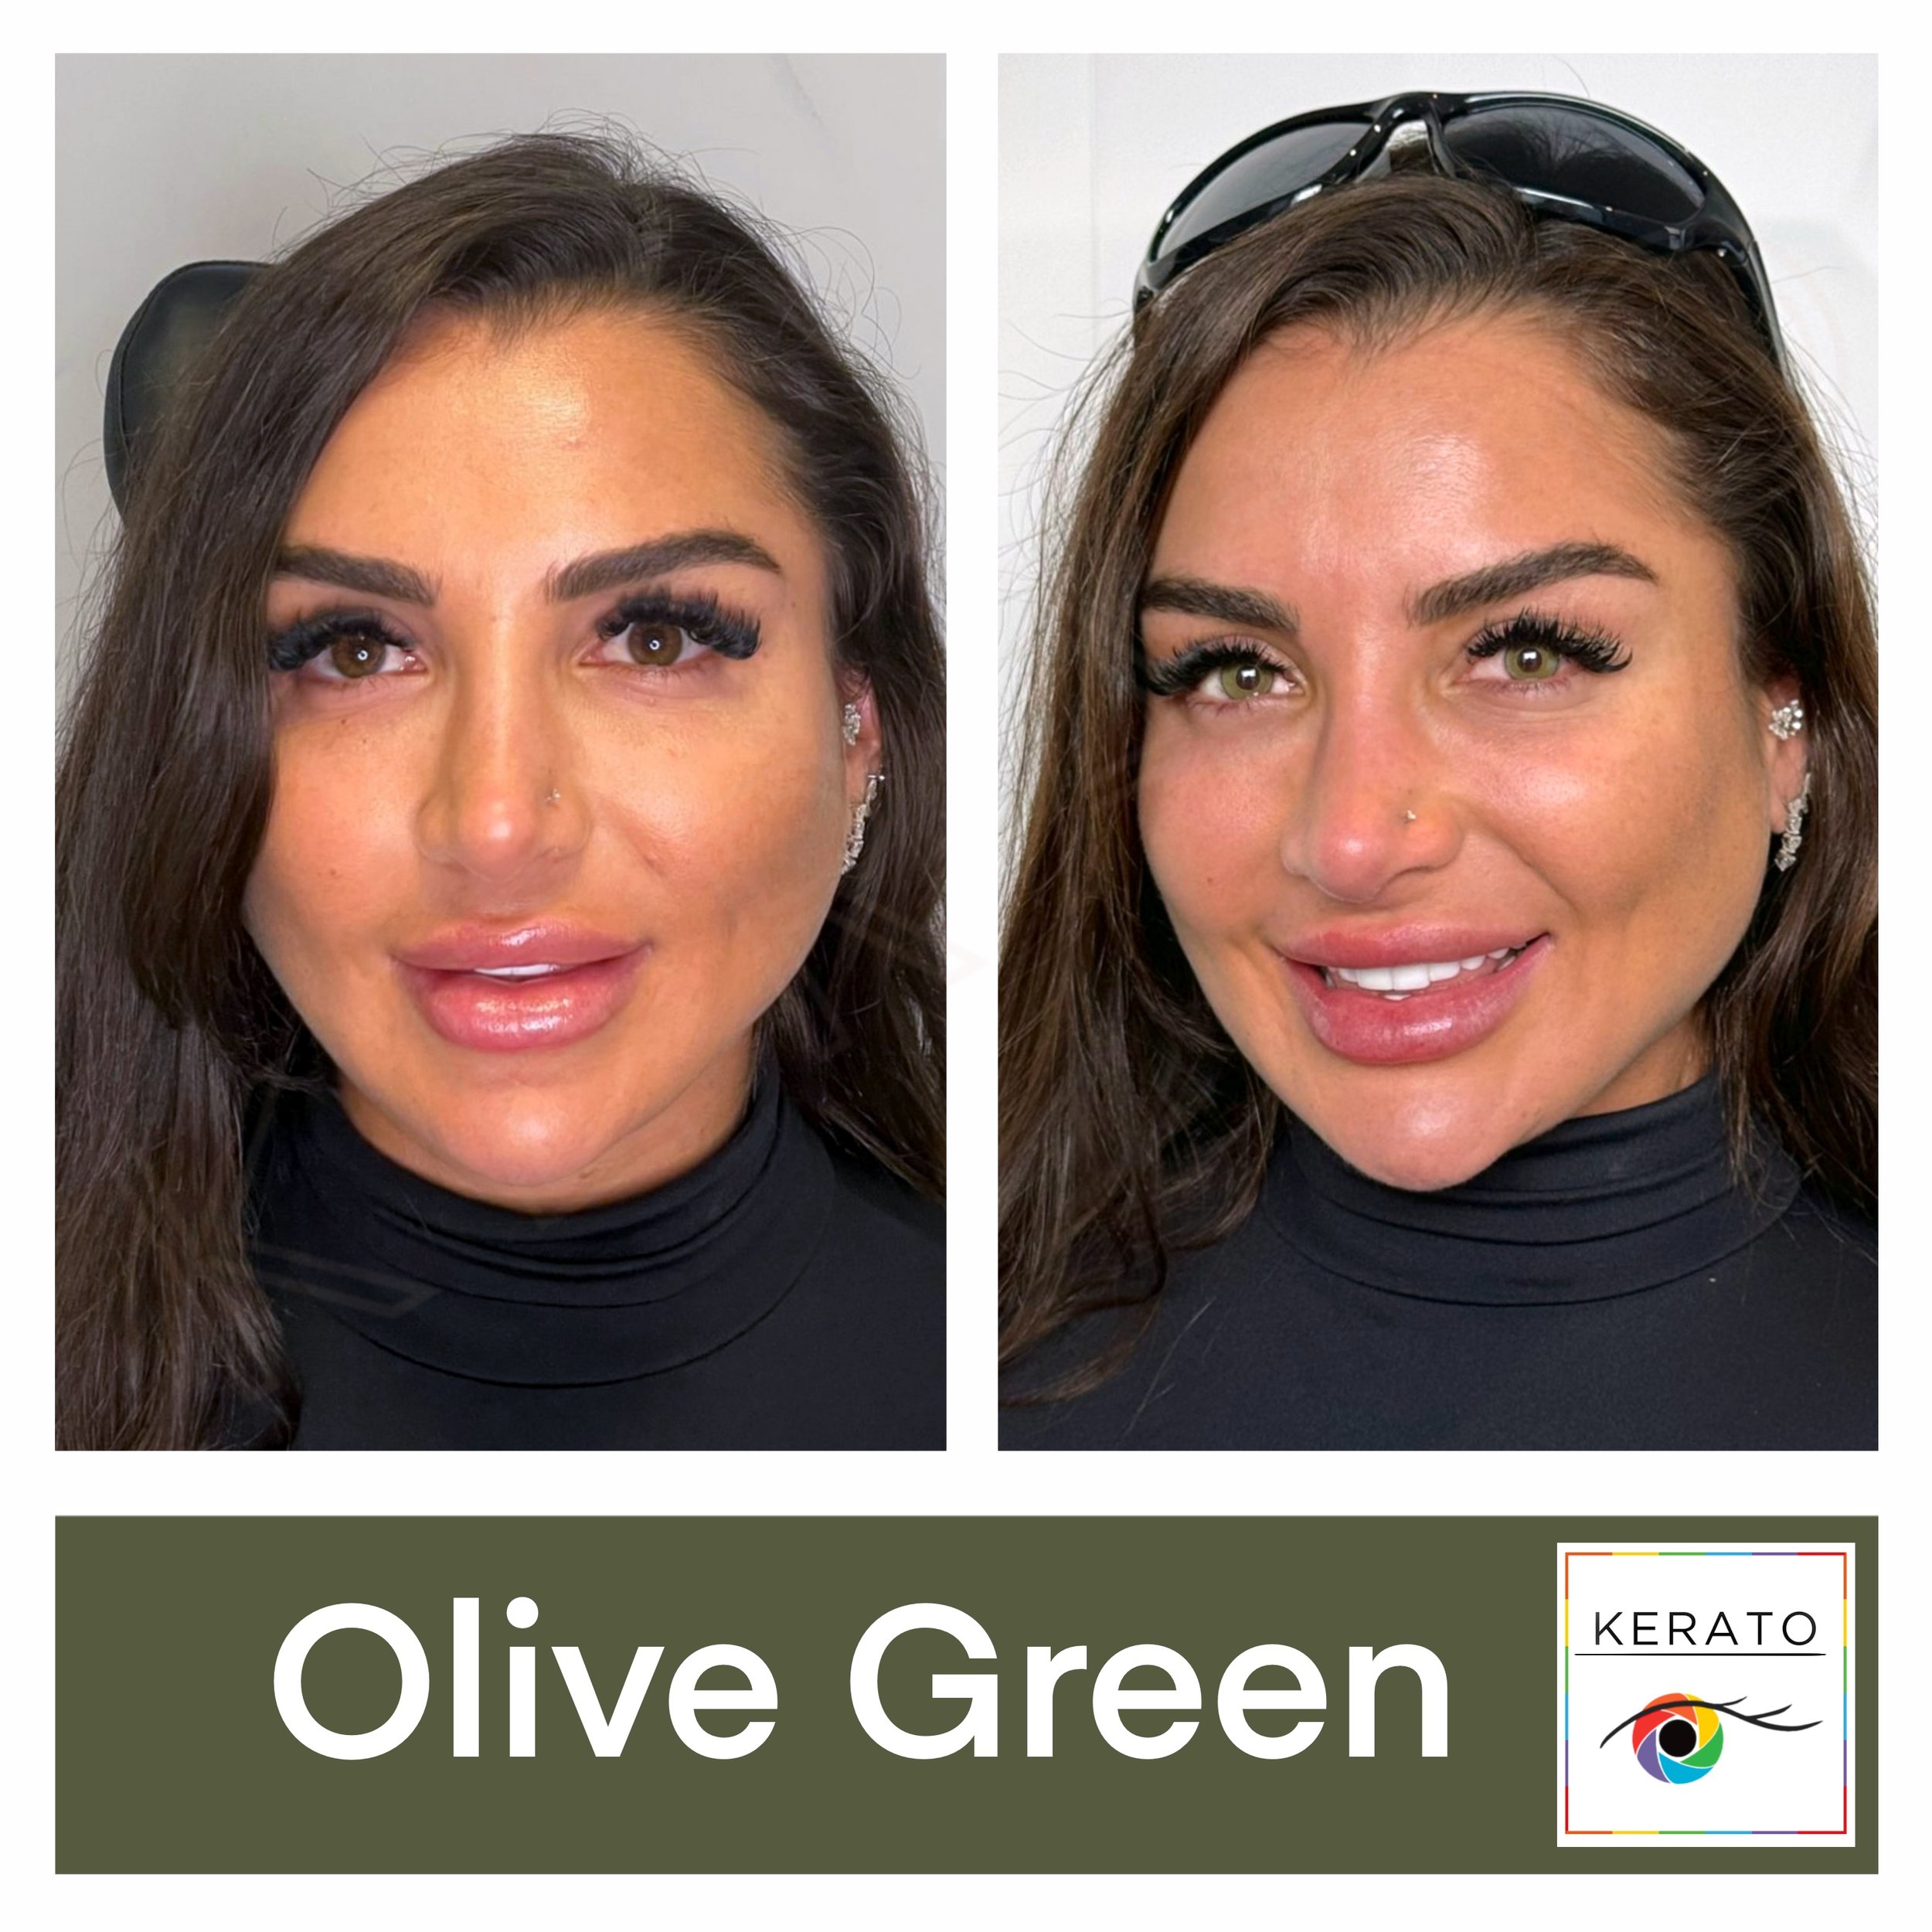 Eye Color Change with Olive Green Pigment at KERATO